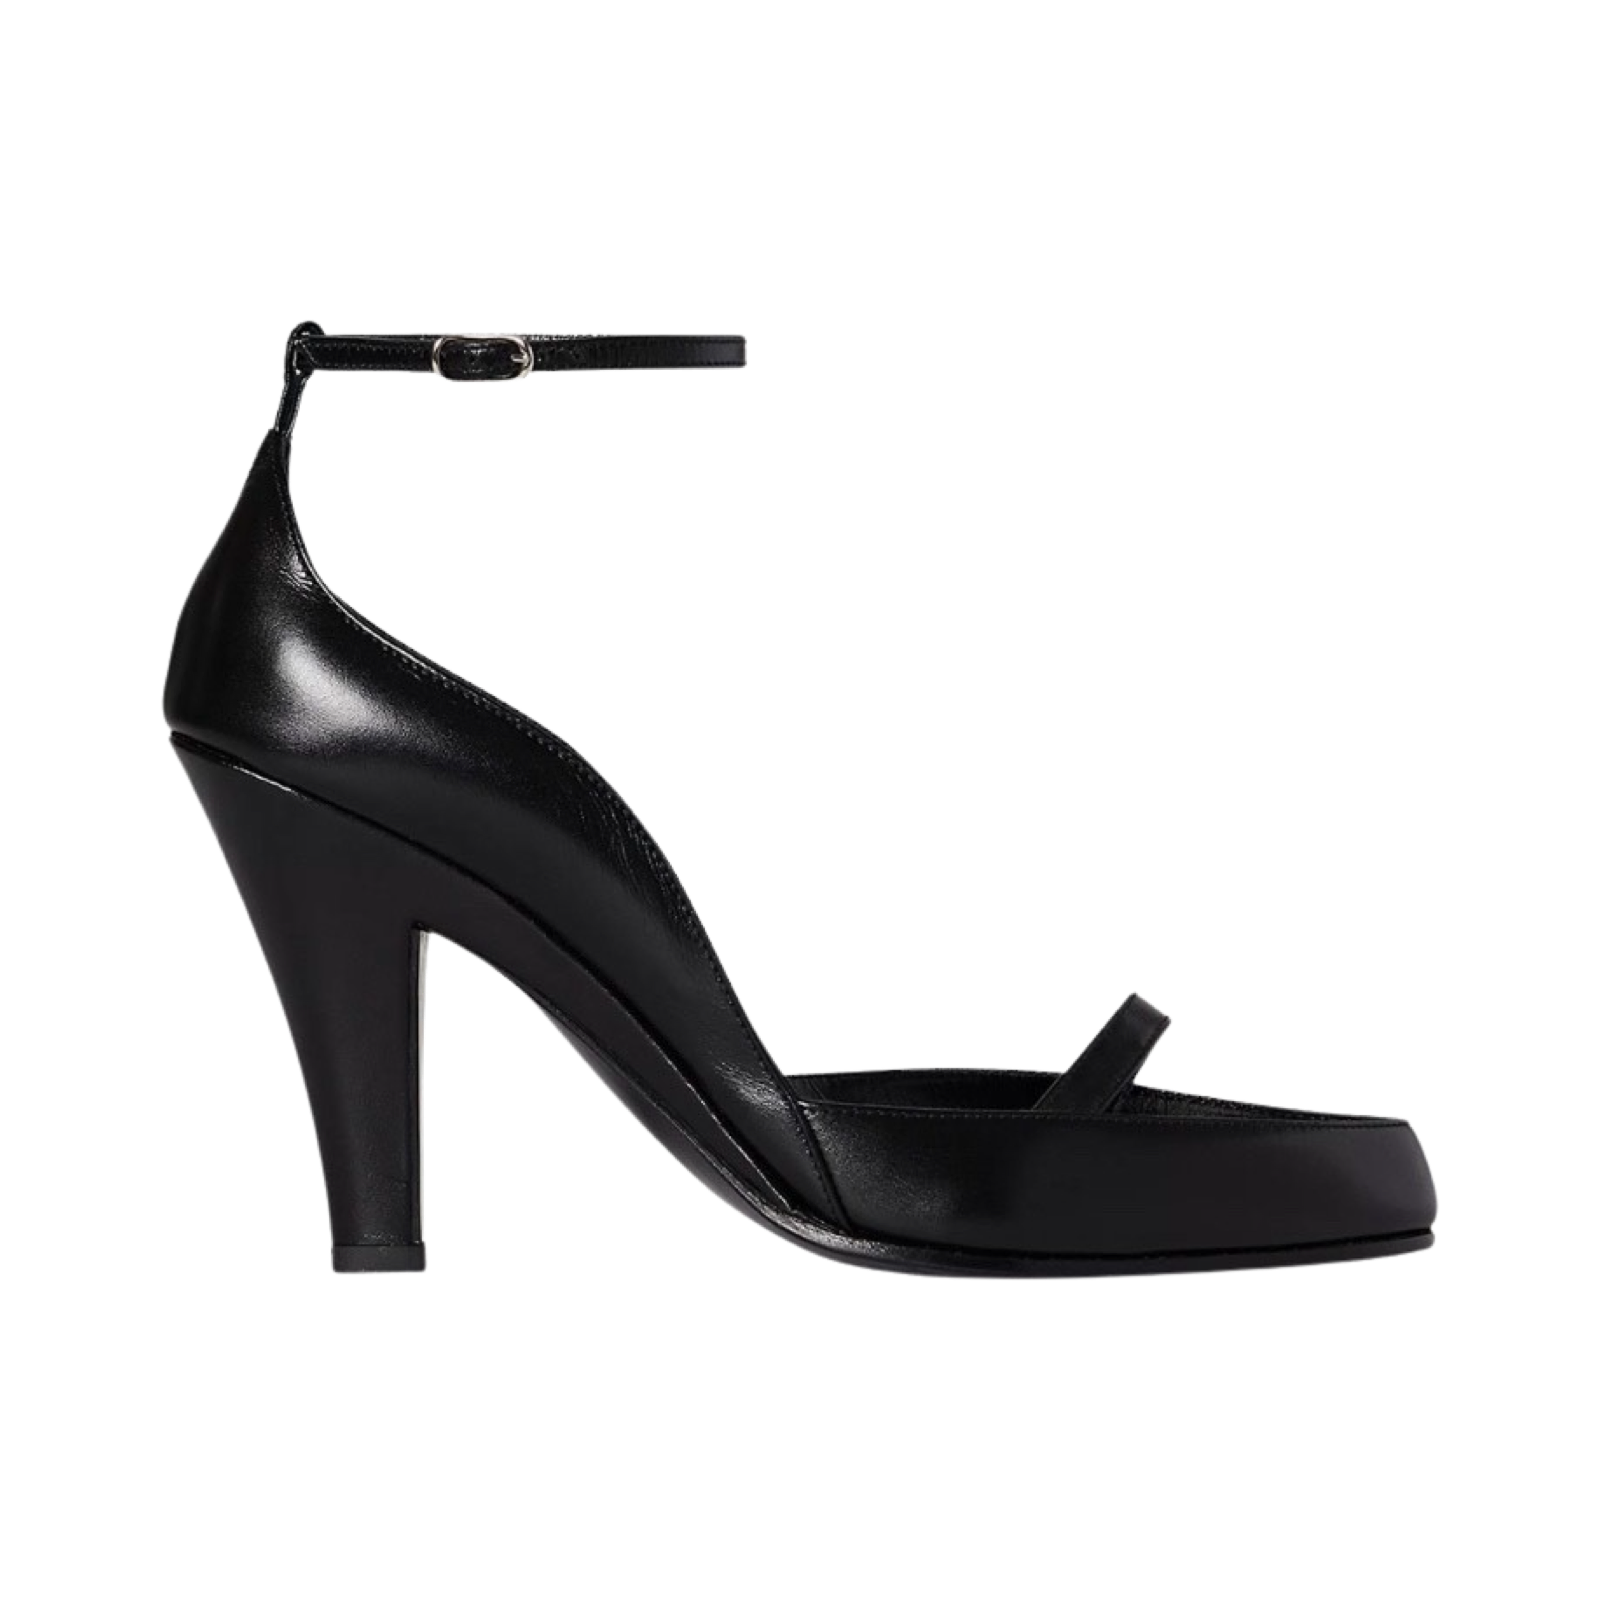 The Row Ankle Strap Heel Sale